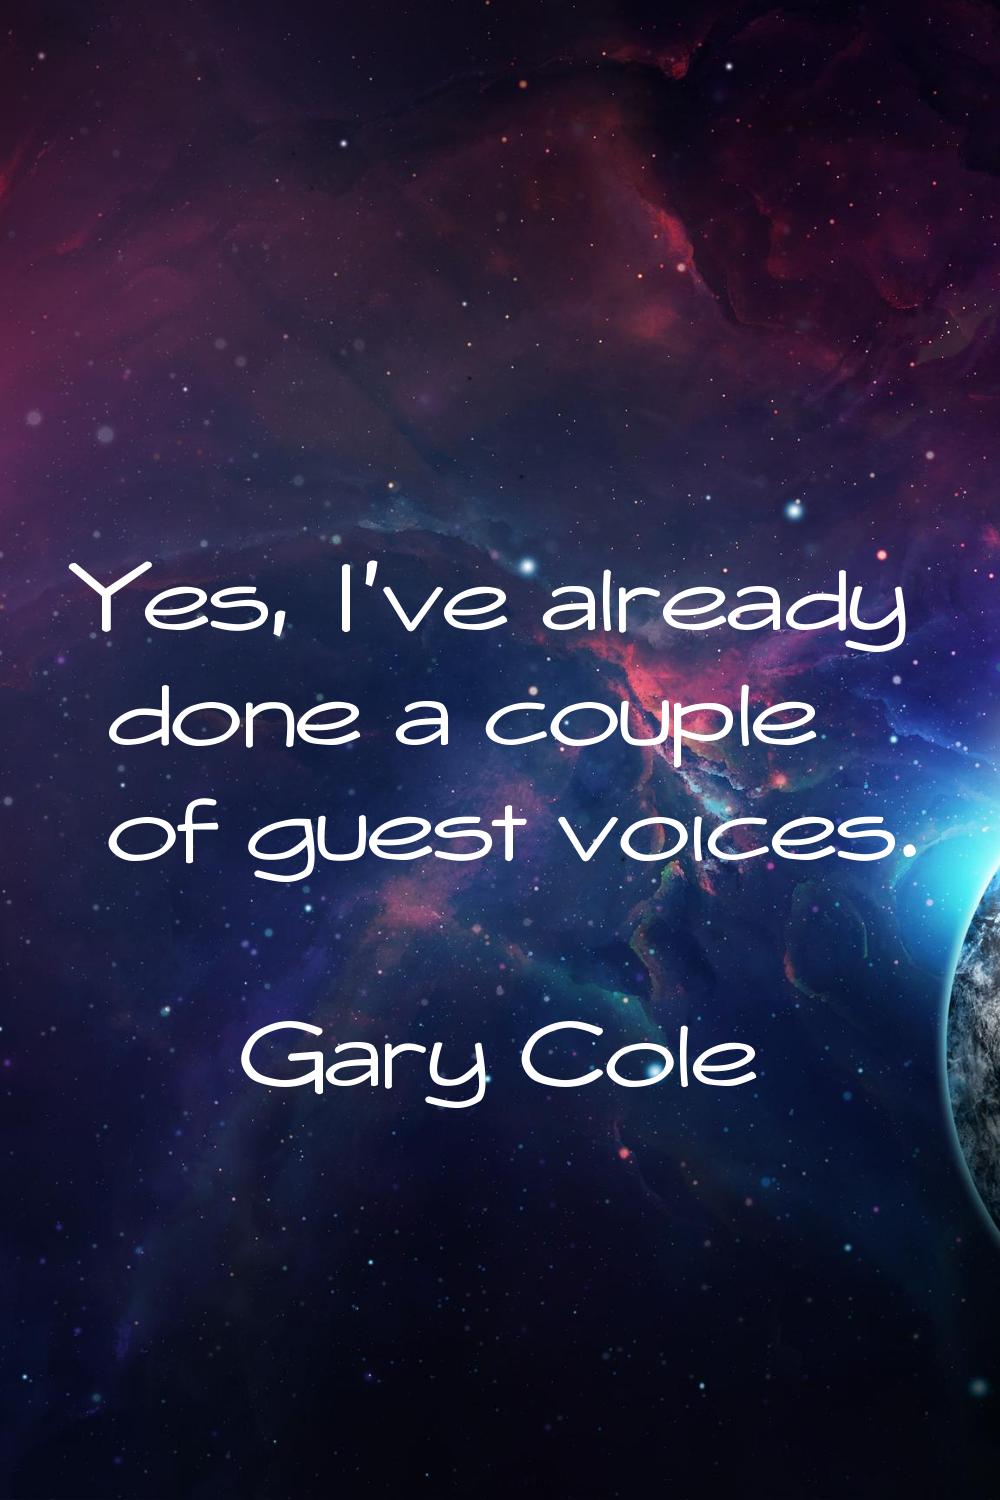 Yes, I've already done a couple of guest voices.